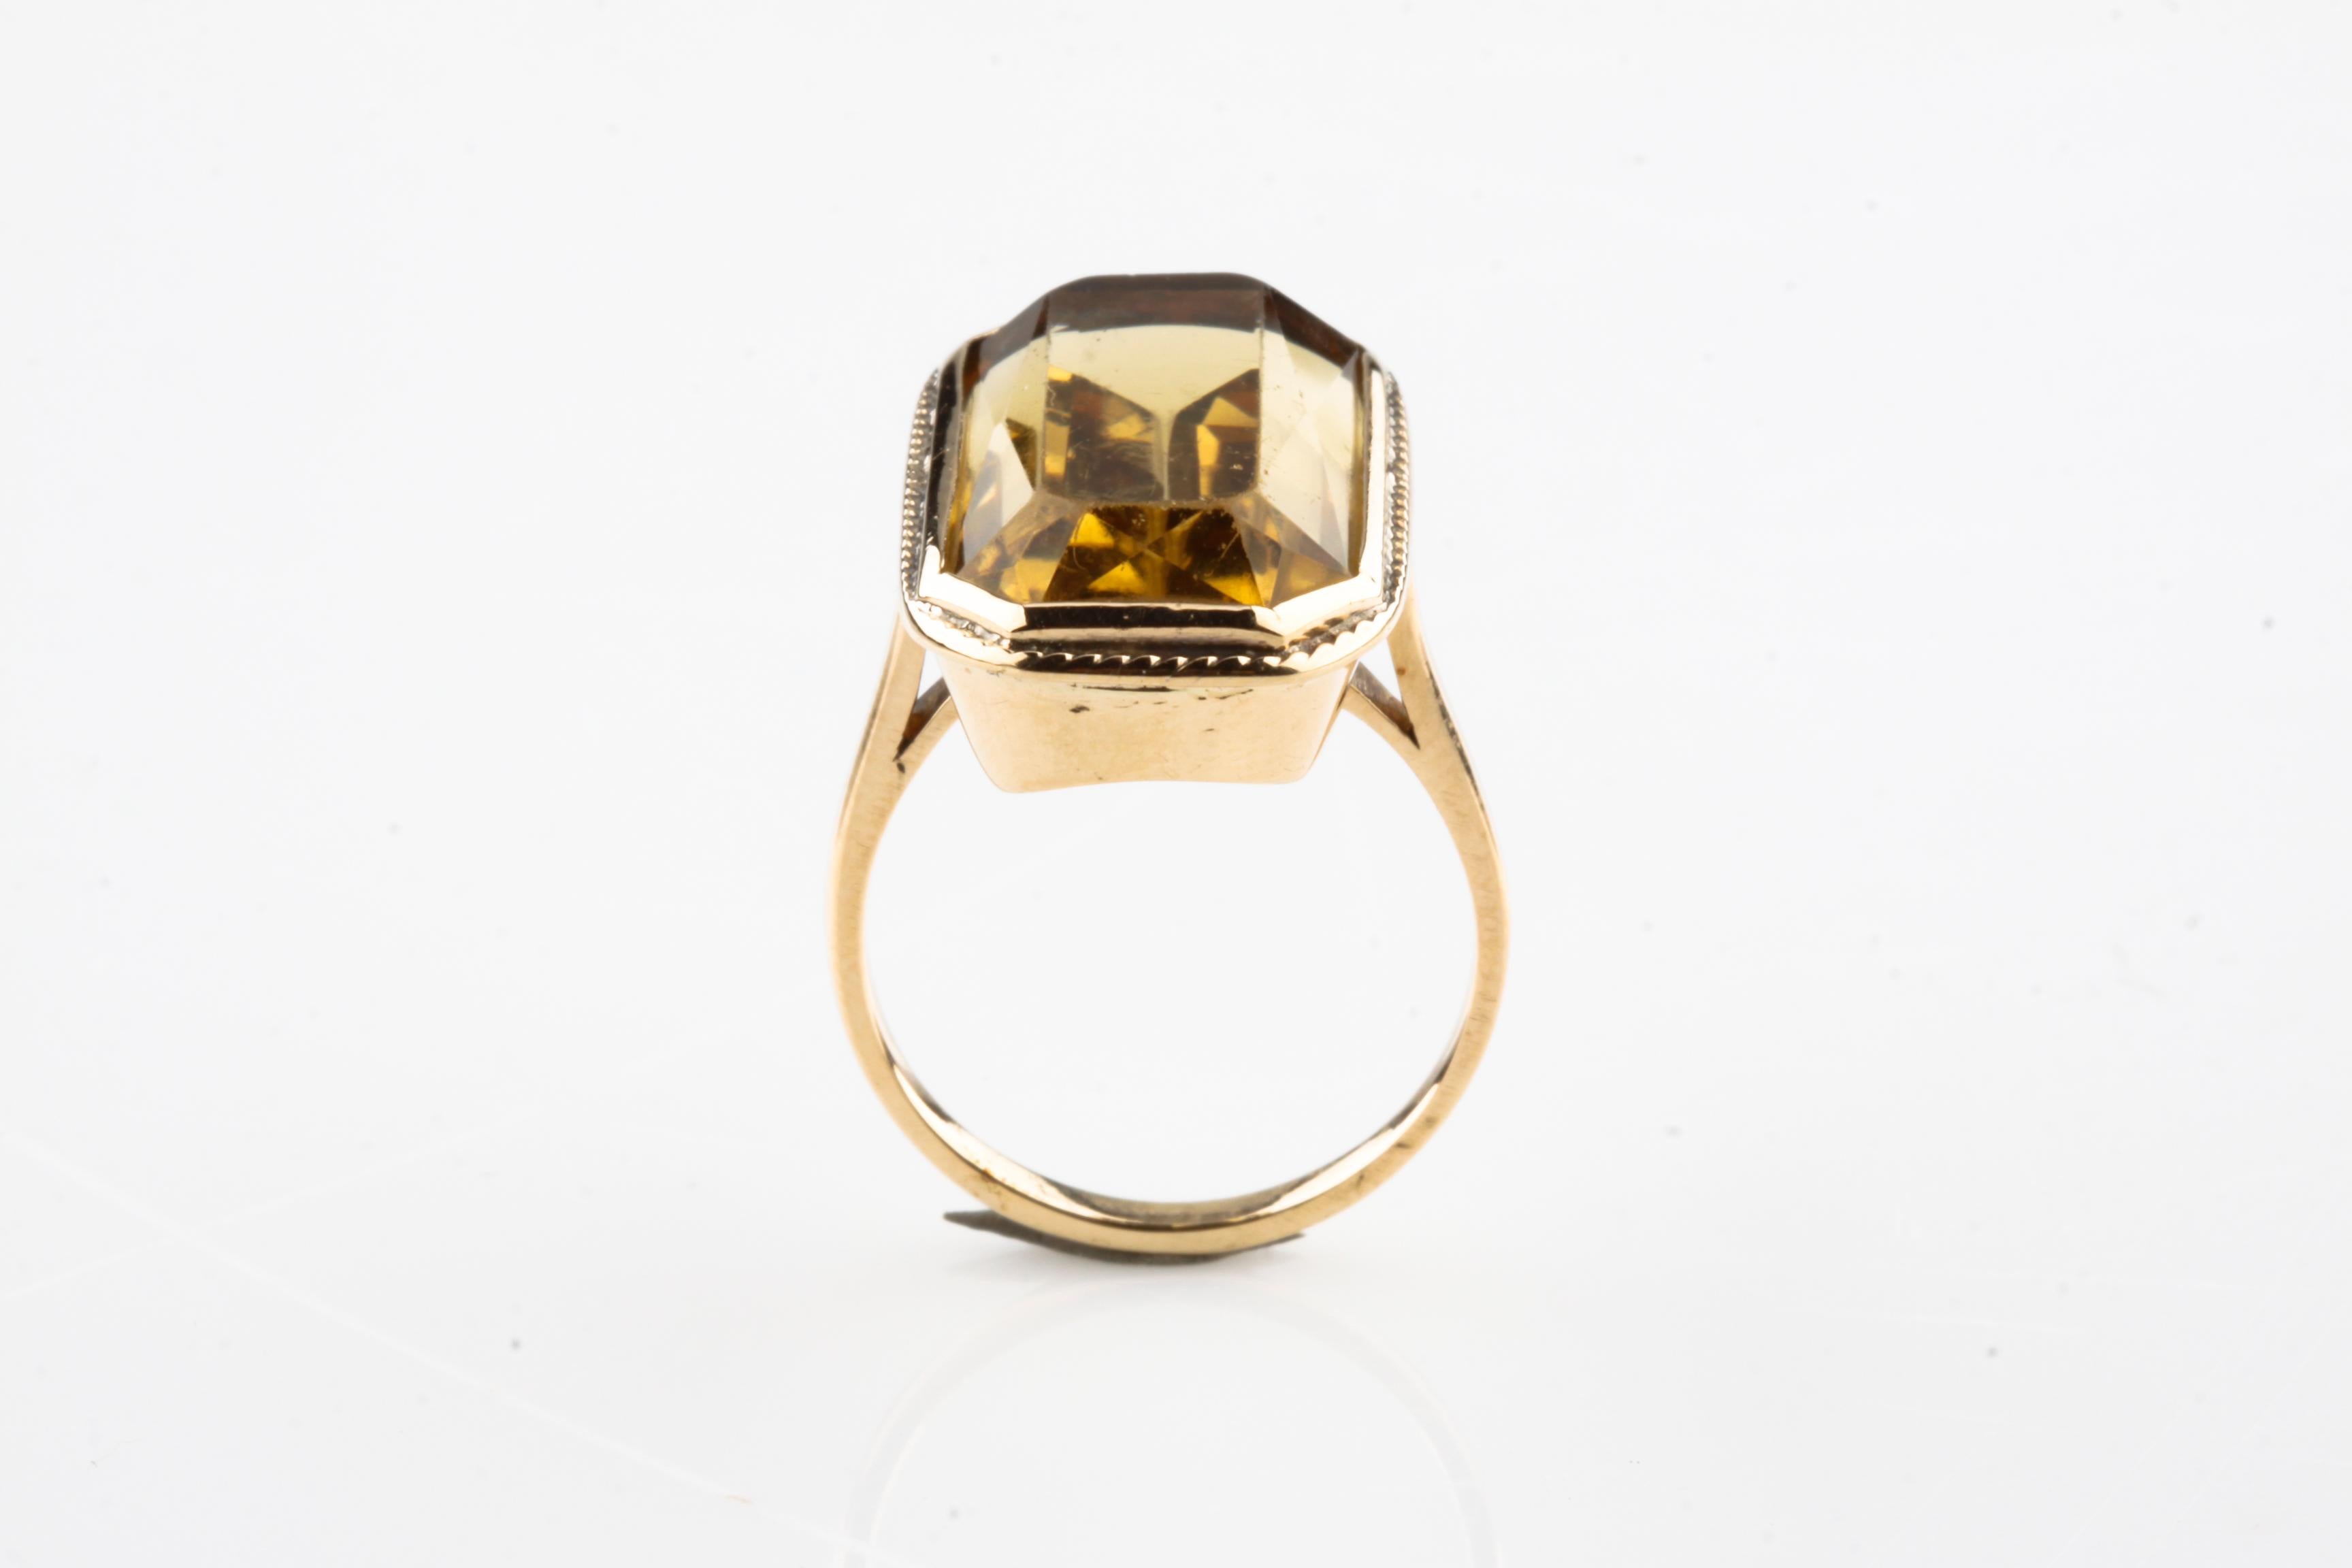 One electronically tested 14KT yellow gold ladies cast citrine solitaire ring
Bright polish finish
Condition is good
Ladies 14KT Yellow Gold Citrine Solitaire Ring
The features citrine is set within a yellow gold bezel
Completed by a two-millimeter